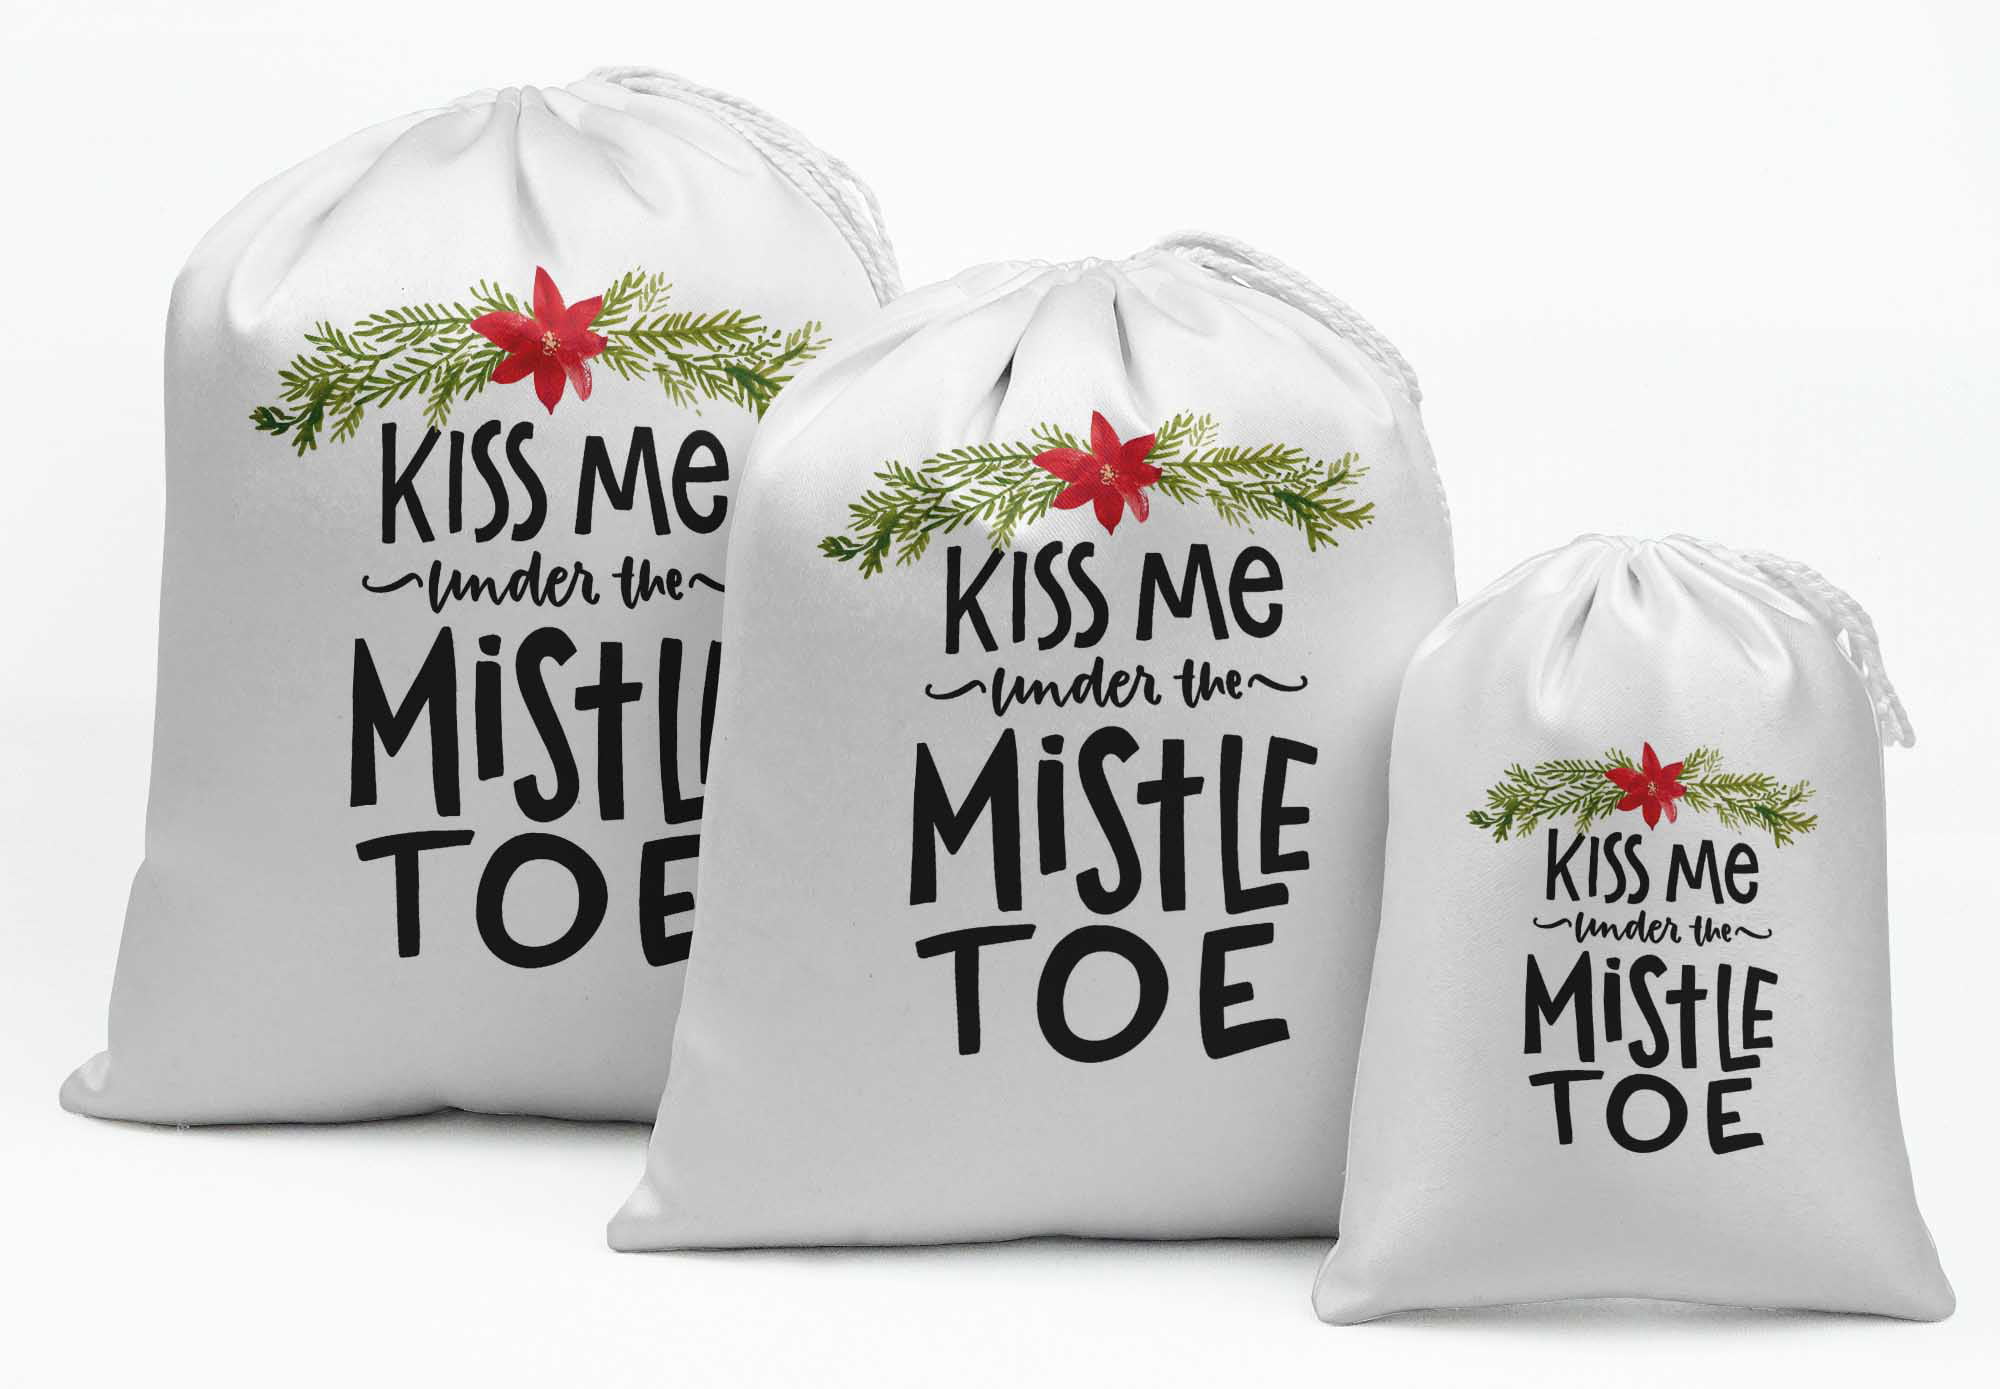 Details about   5Pcs Drawstring Christmas Favor Party DIY Bags Gift Candy Empty Wrapping Art Bag 